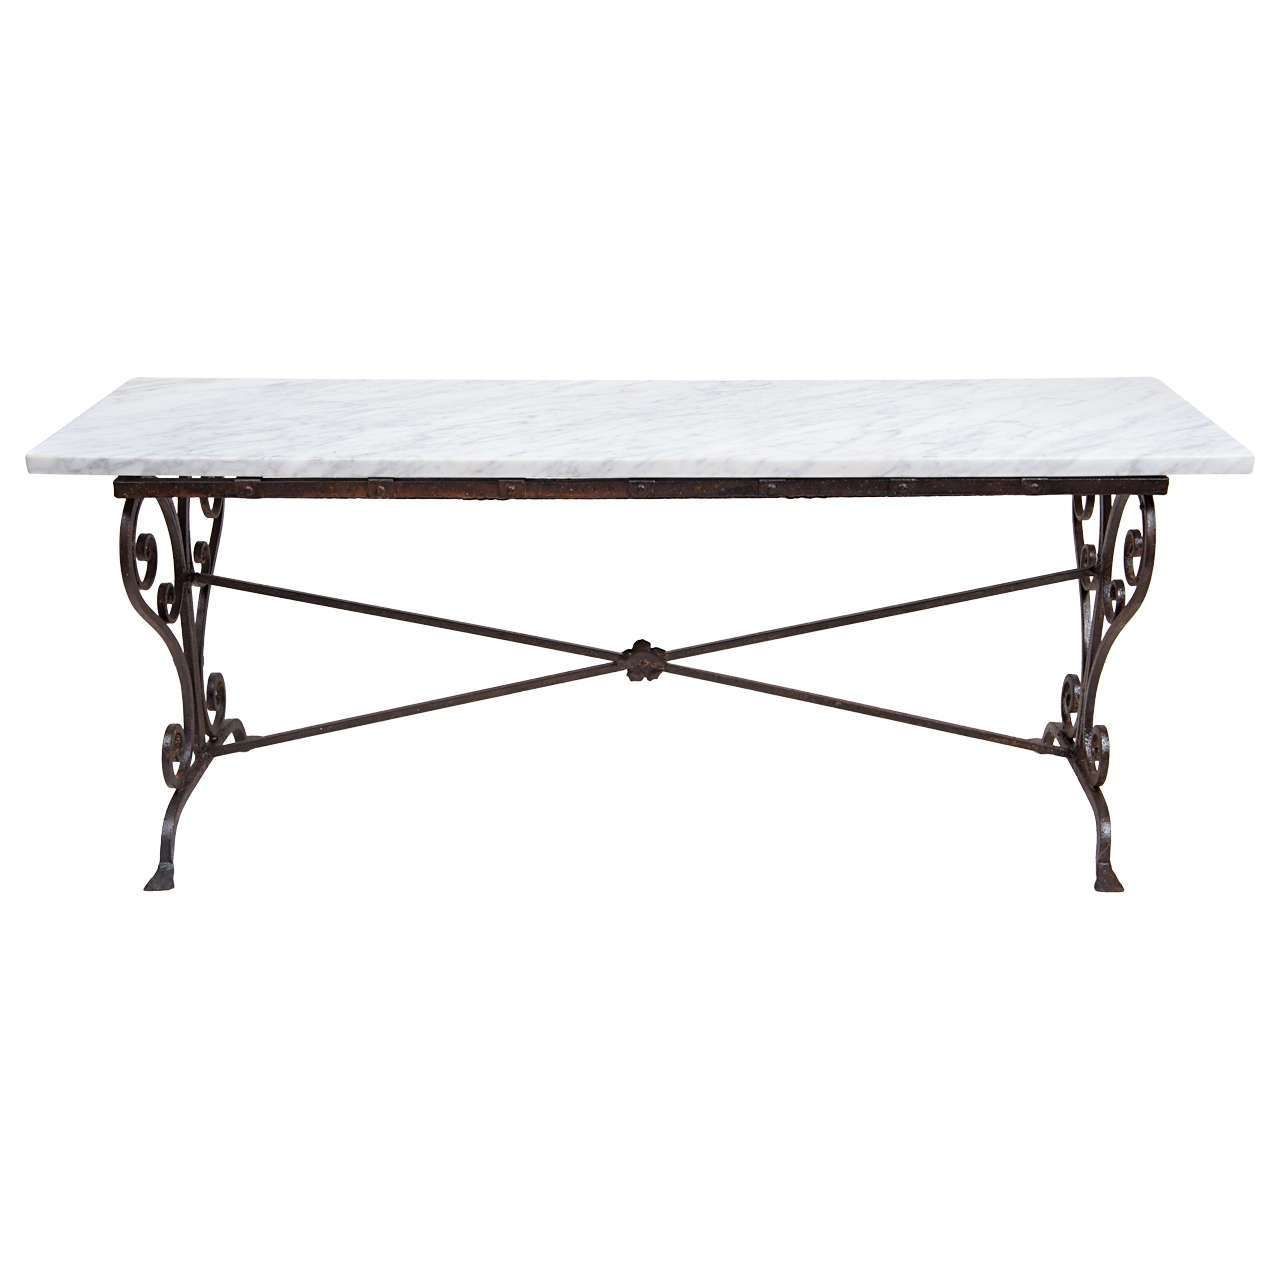 Wrought Iron Coffee Table And Chairs Suitable Plus Antique Wrought In Most Up To Date Marble And Metal Coffee Tables (View 8 of 20)